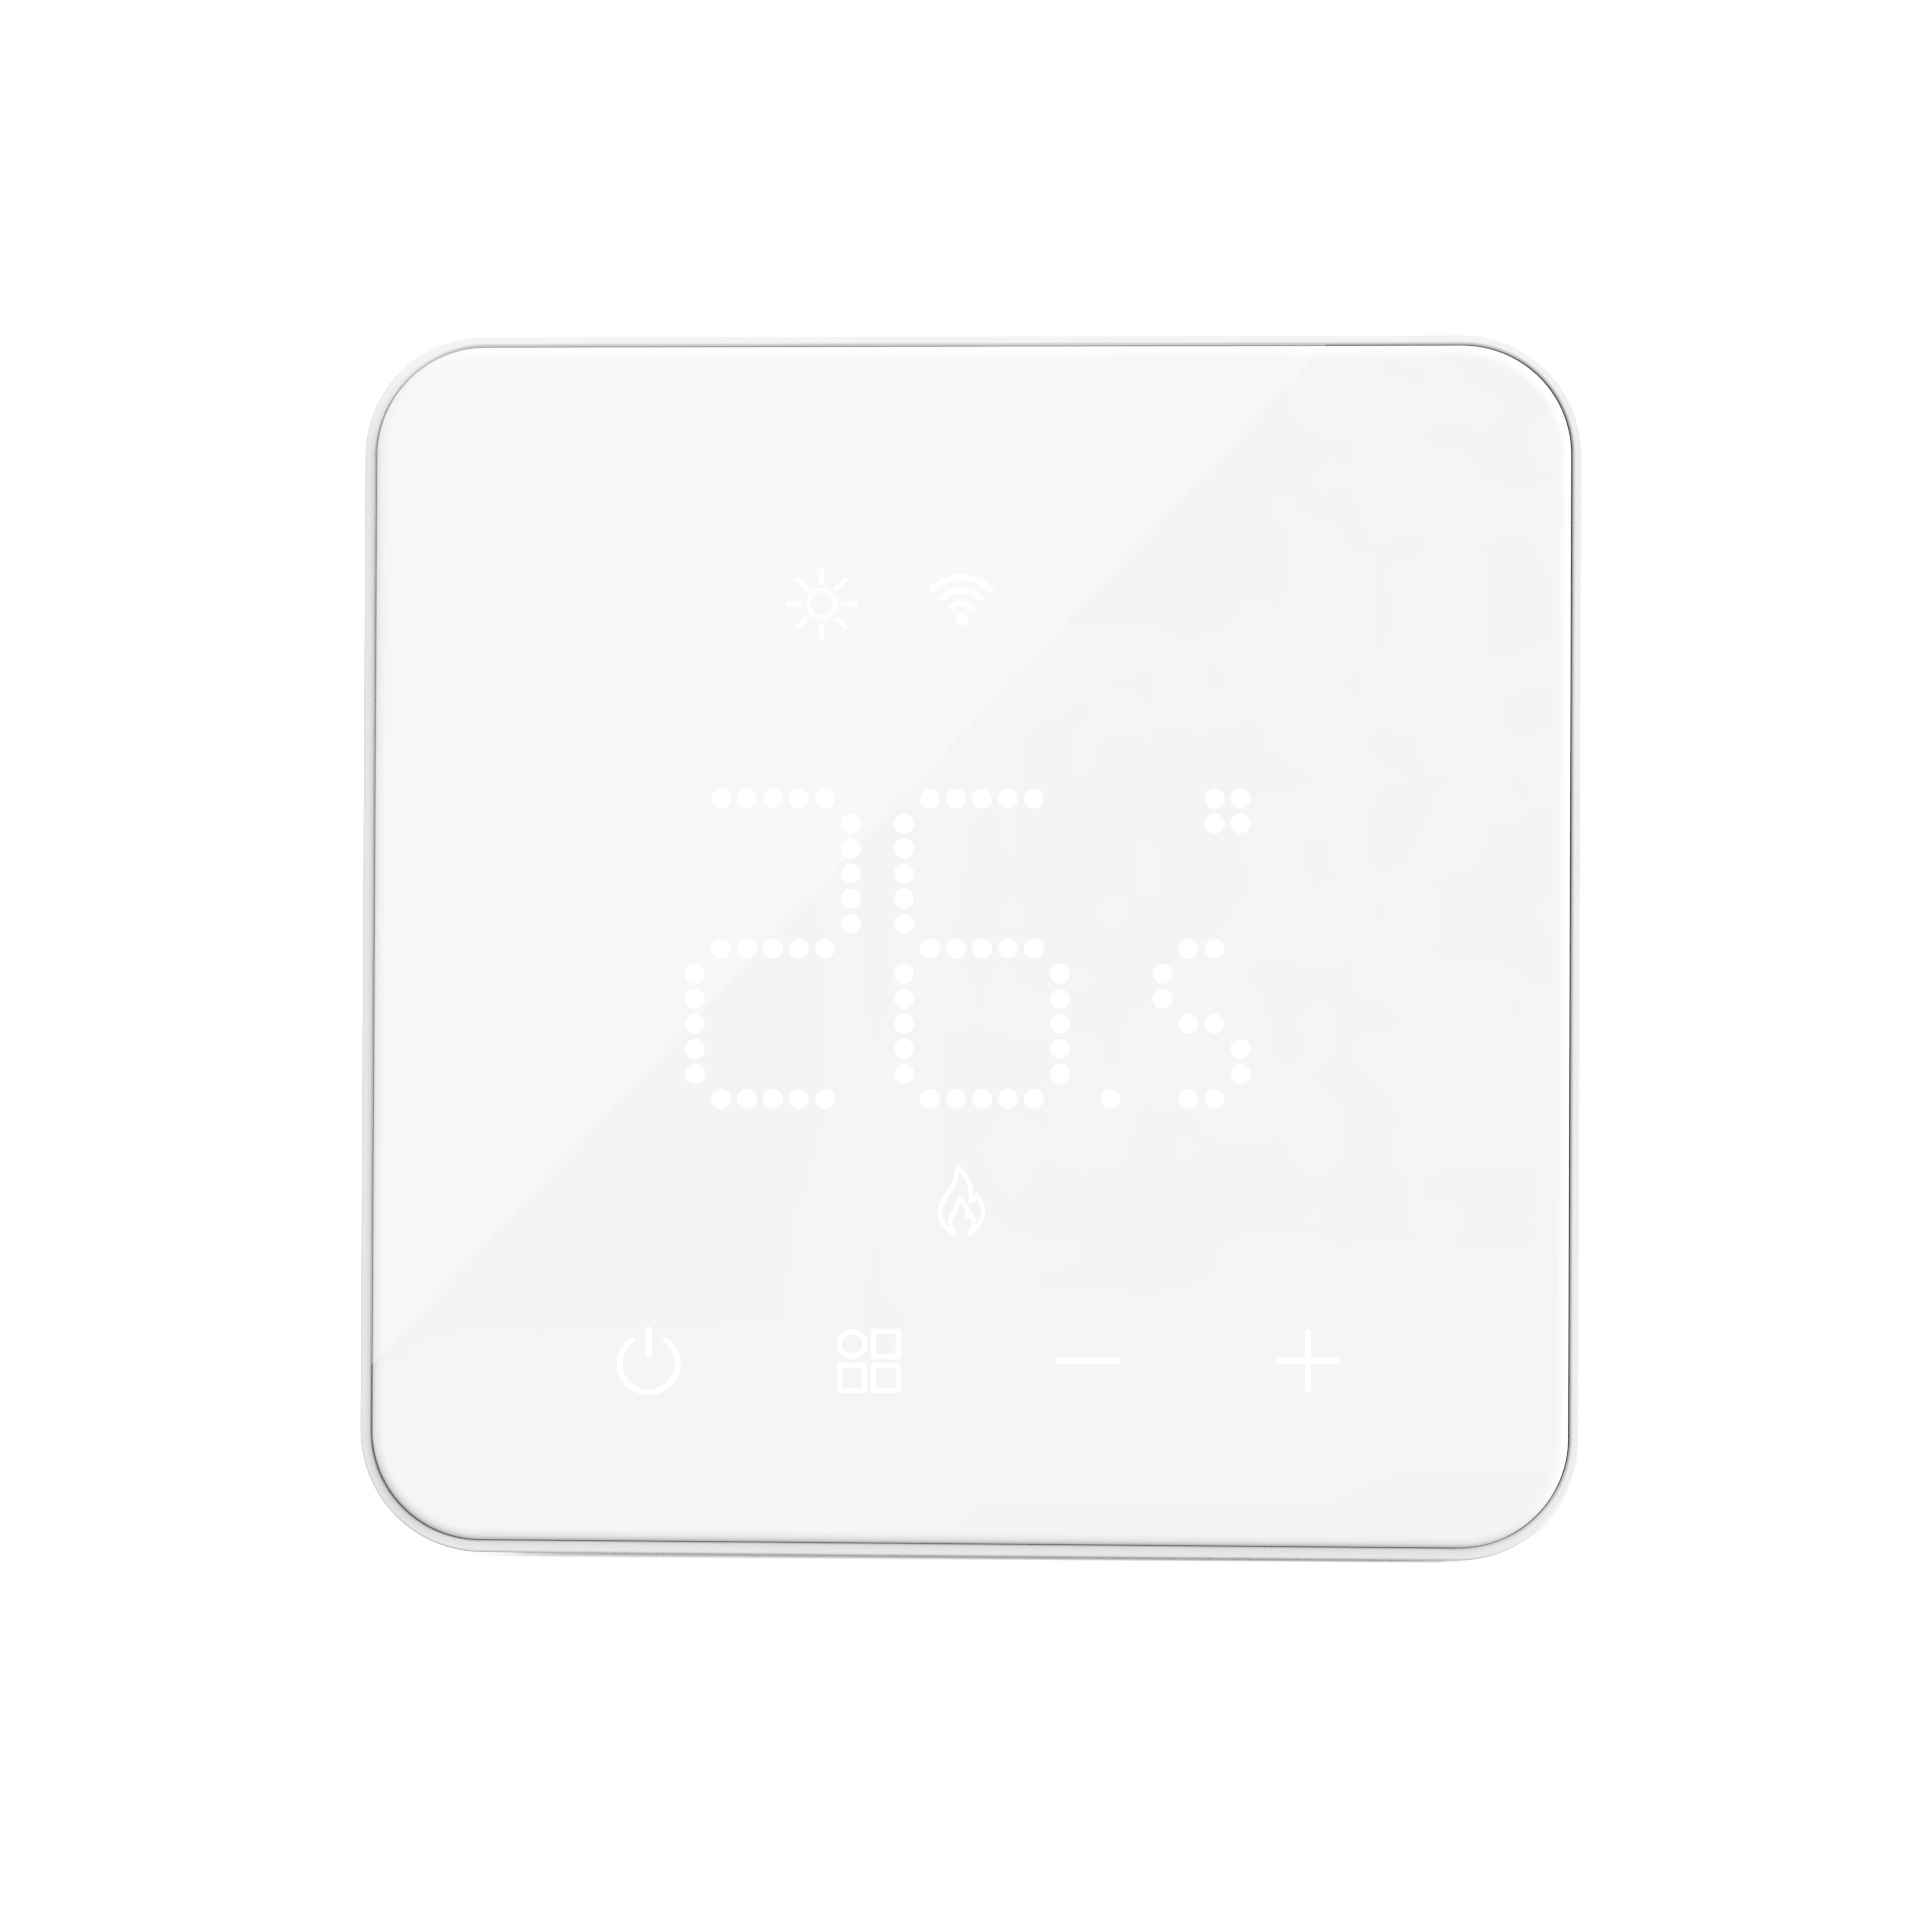 Battery LED Display Underfloor Heating or Ceiling Cooling WiFi Thermostat